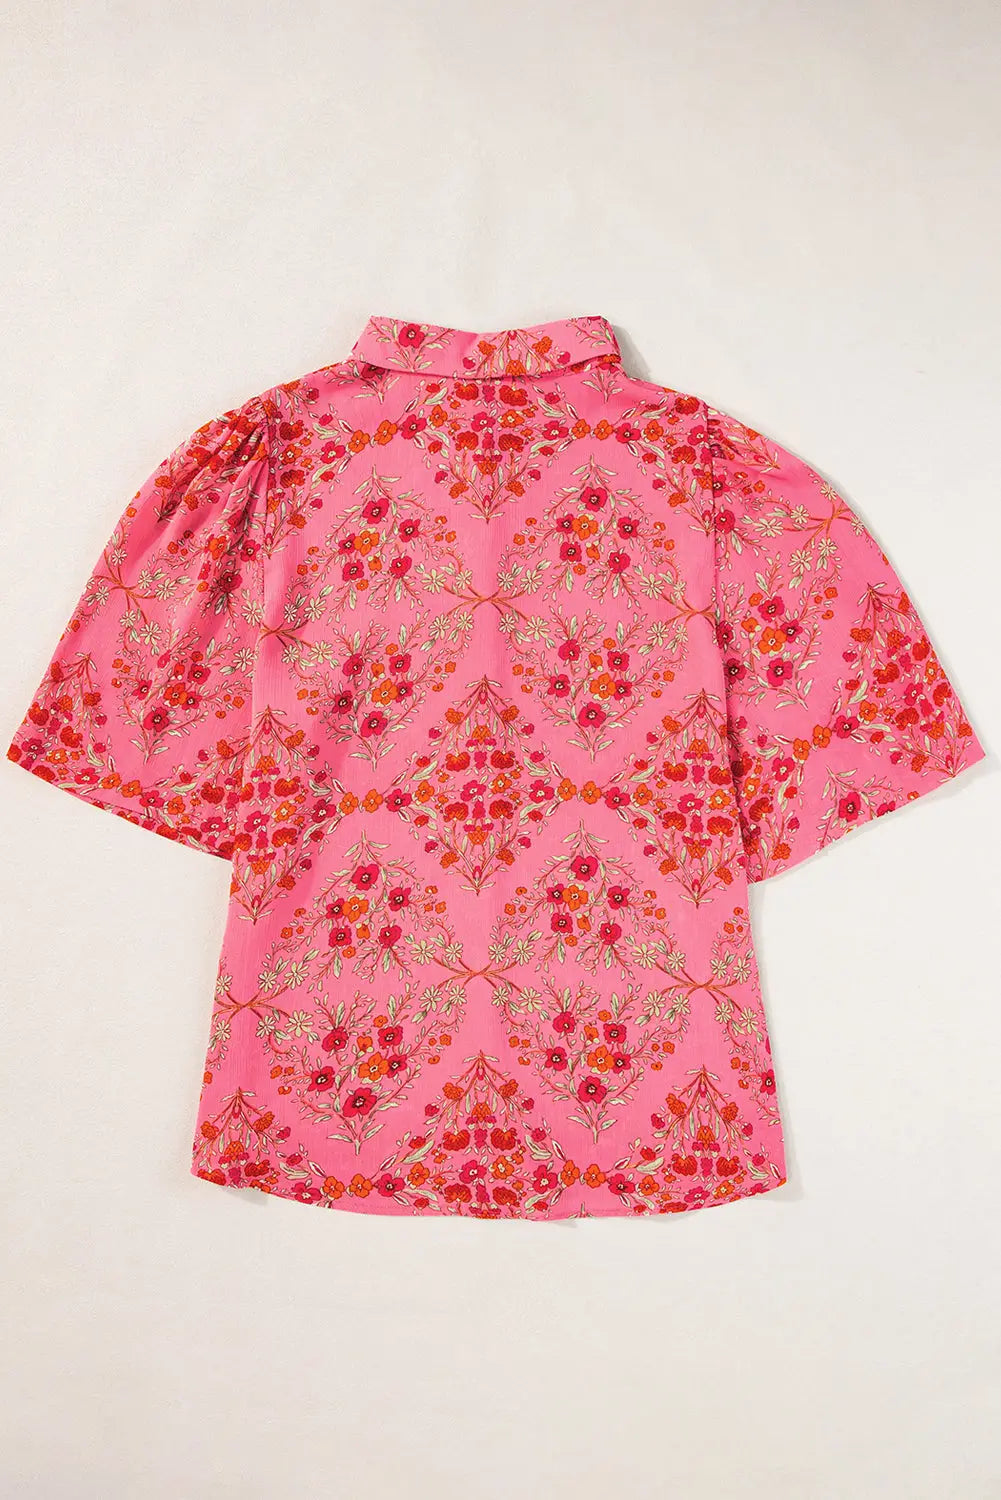 Rose red floral loose shirt - tops/blouses & shirts